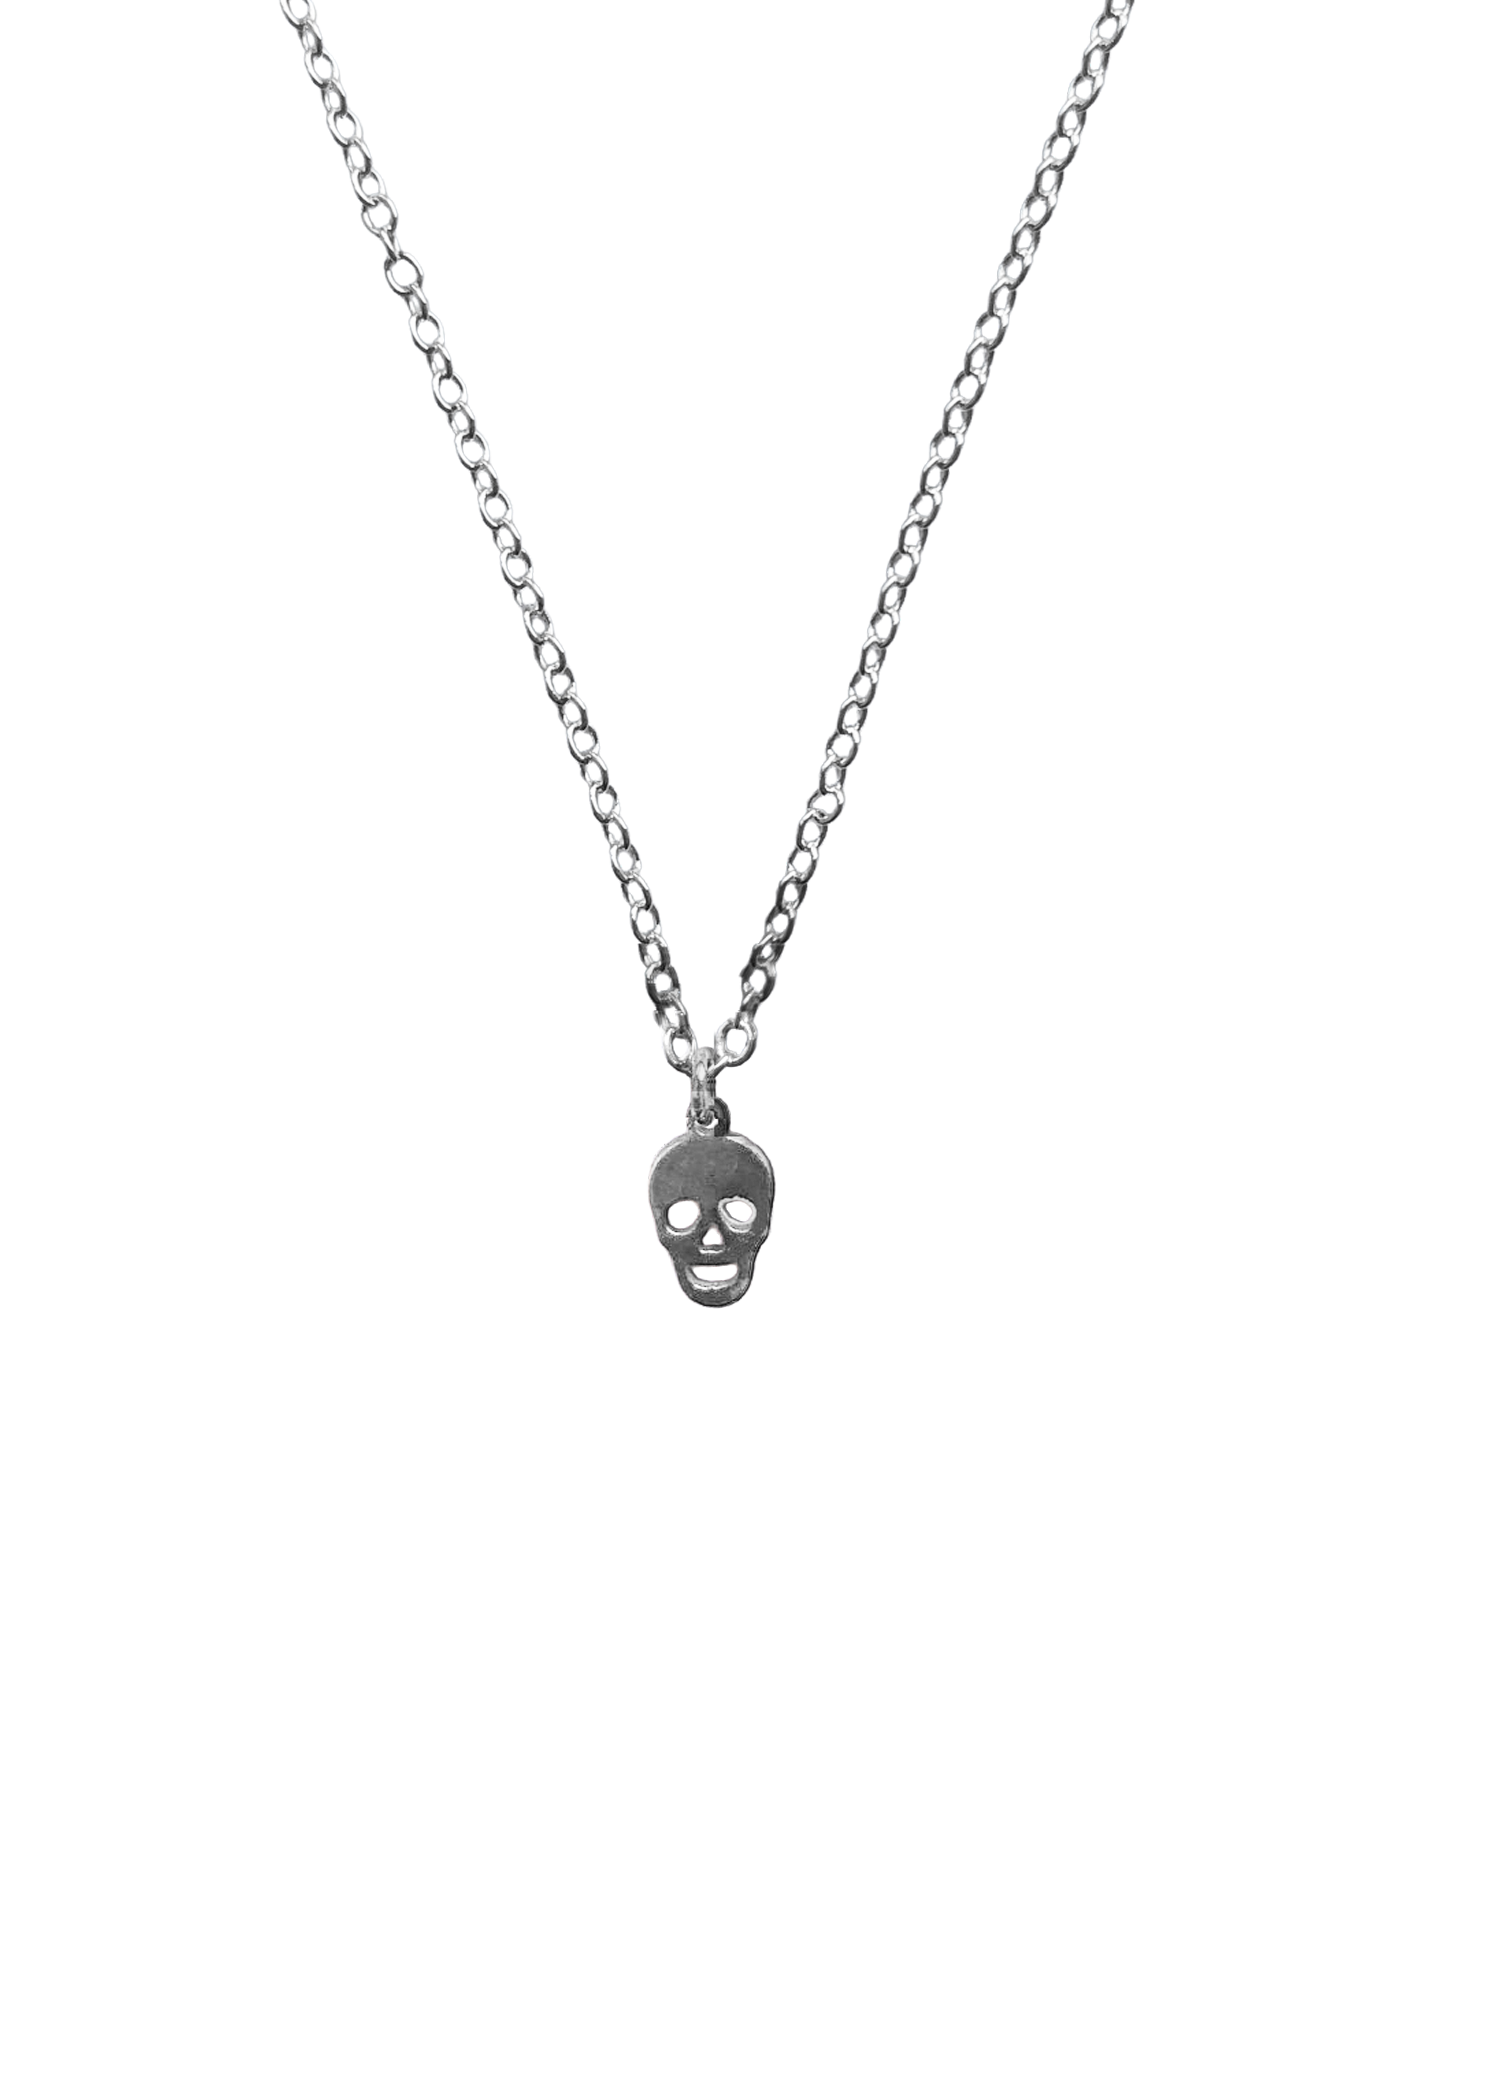 Skull Charm Necklace - .925 Sterling Silver